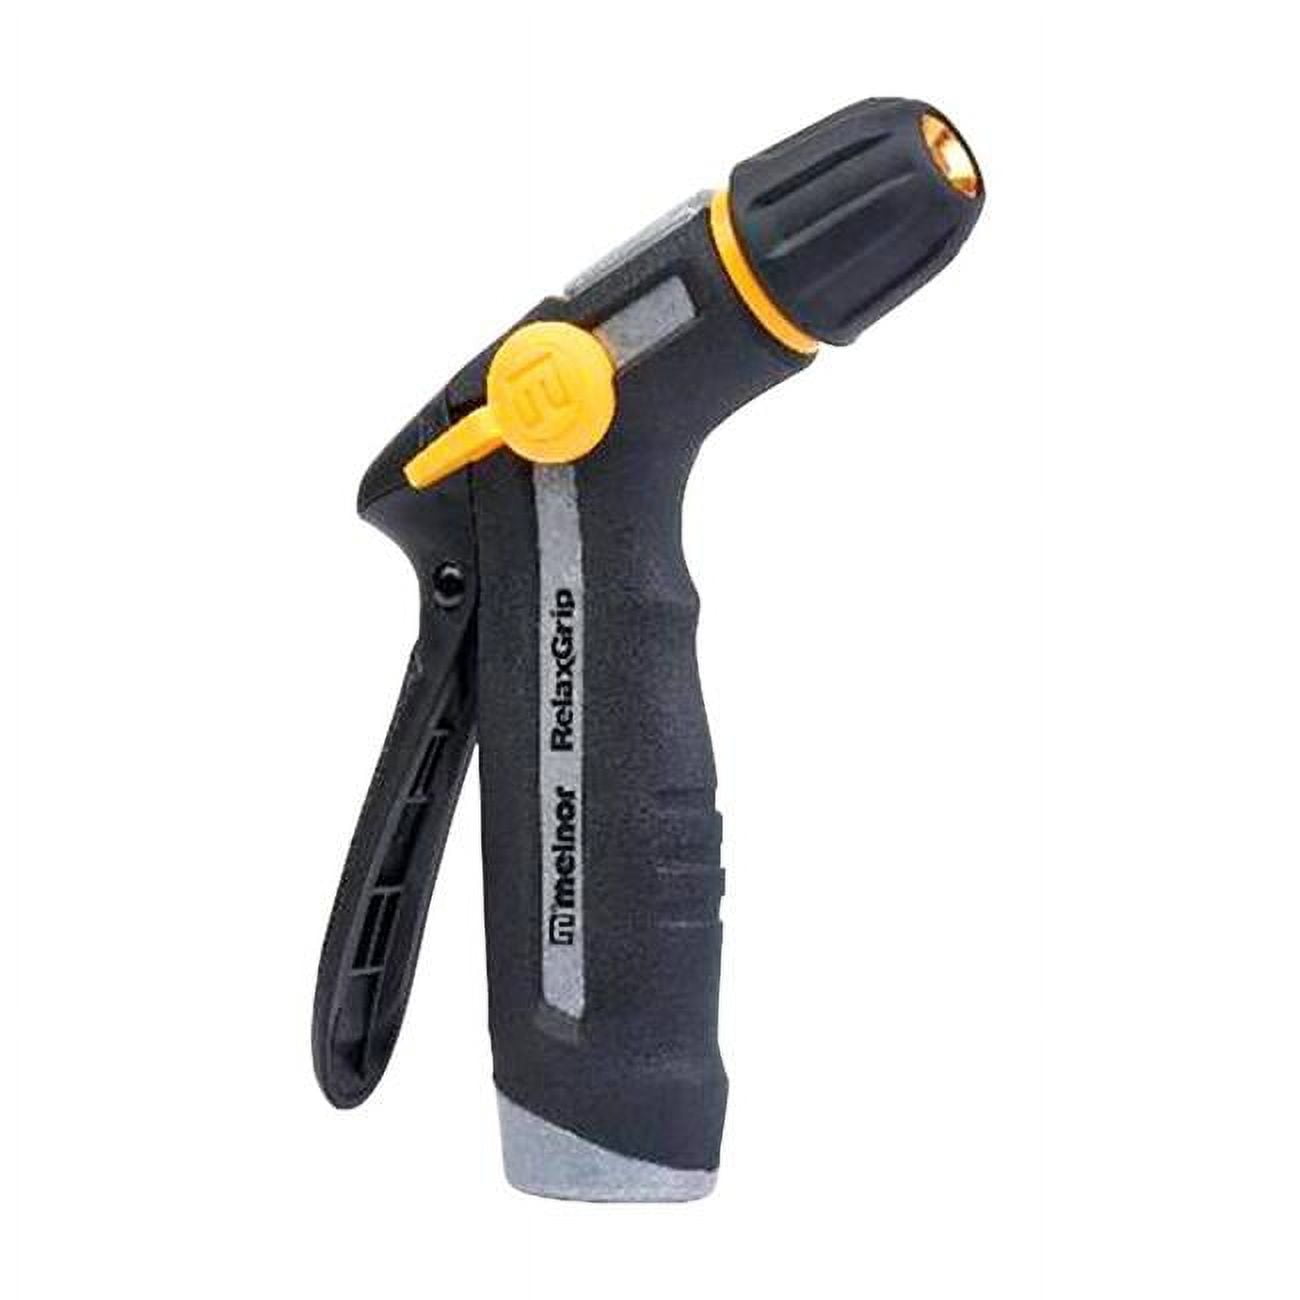 Picture of Melnor 7803166 Adjustable Metal Hose Nozzle - Black & Yellow